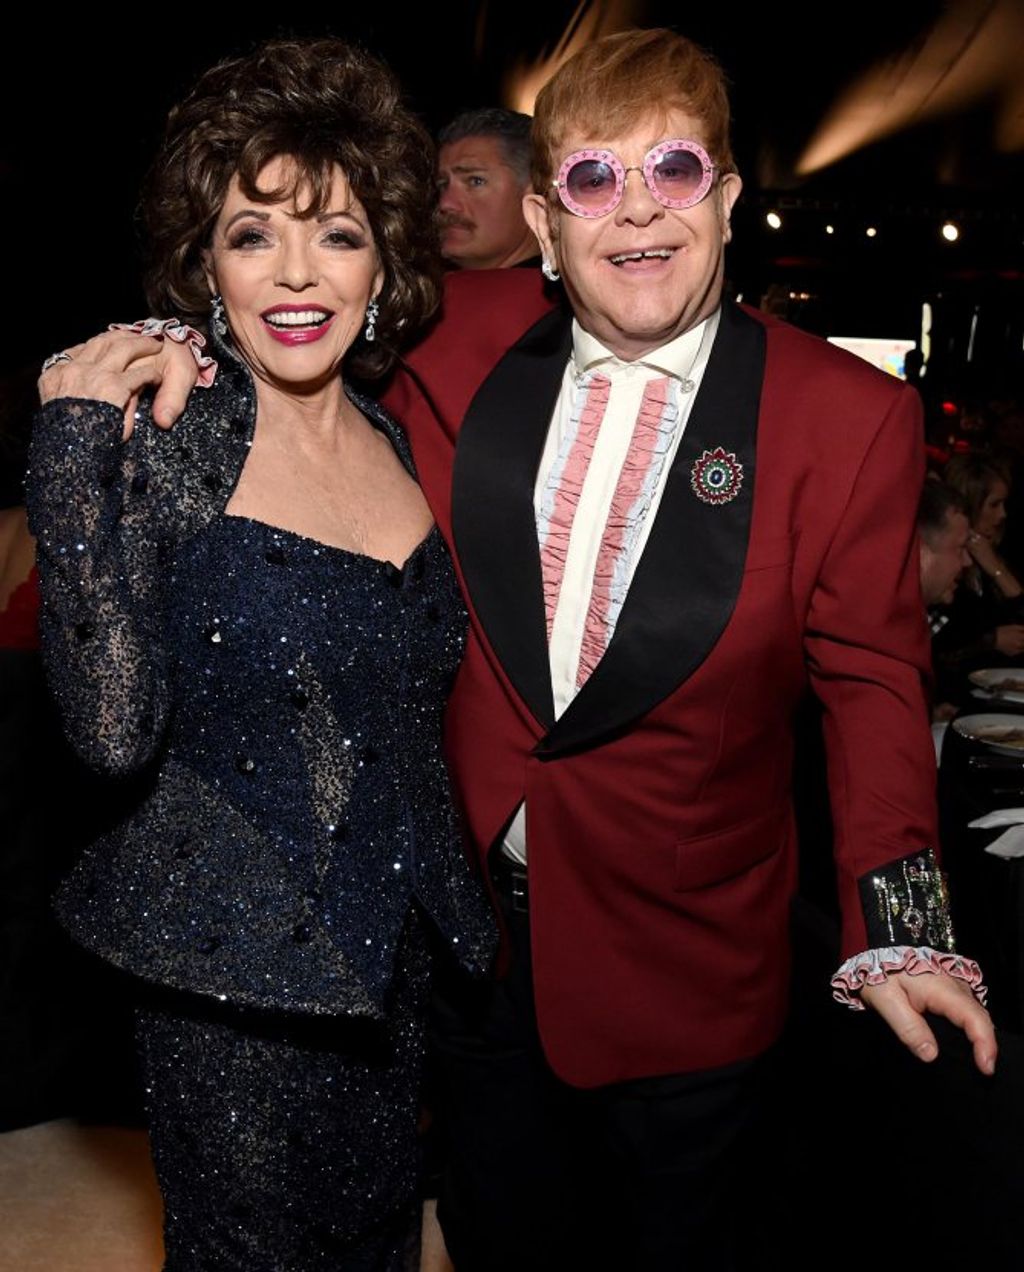 26th Annual Elton John AIDS Foundation Academy Awards Viewing Party sponsored by Bulgari, celebrating EJAF and the 90th Academy Awards  - Inside Oscars WEST HOLLYWOOD, CA - MARCH 04: Joan Collins (L) and Sir Elton John attend the 26th annual Elton John AI